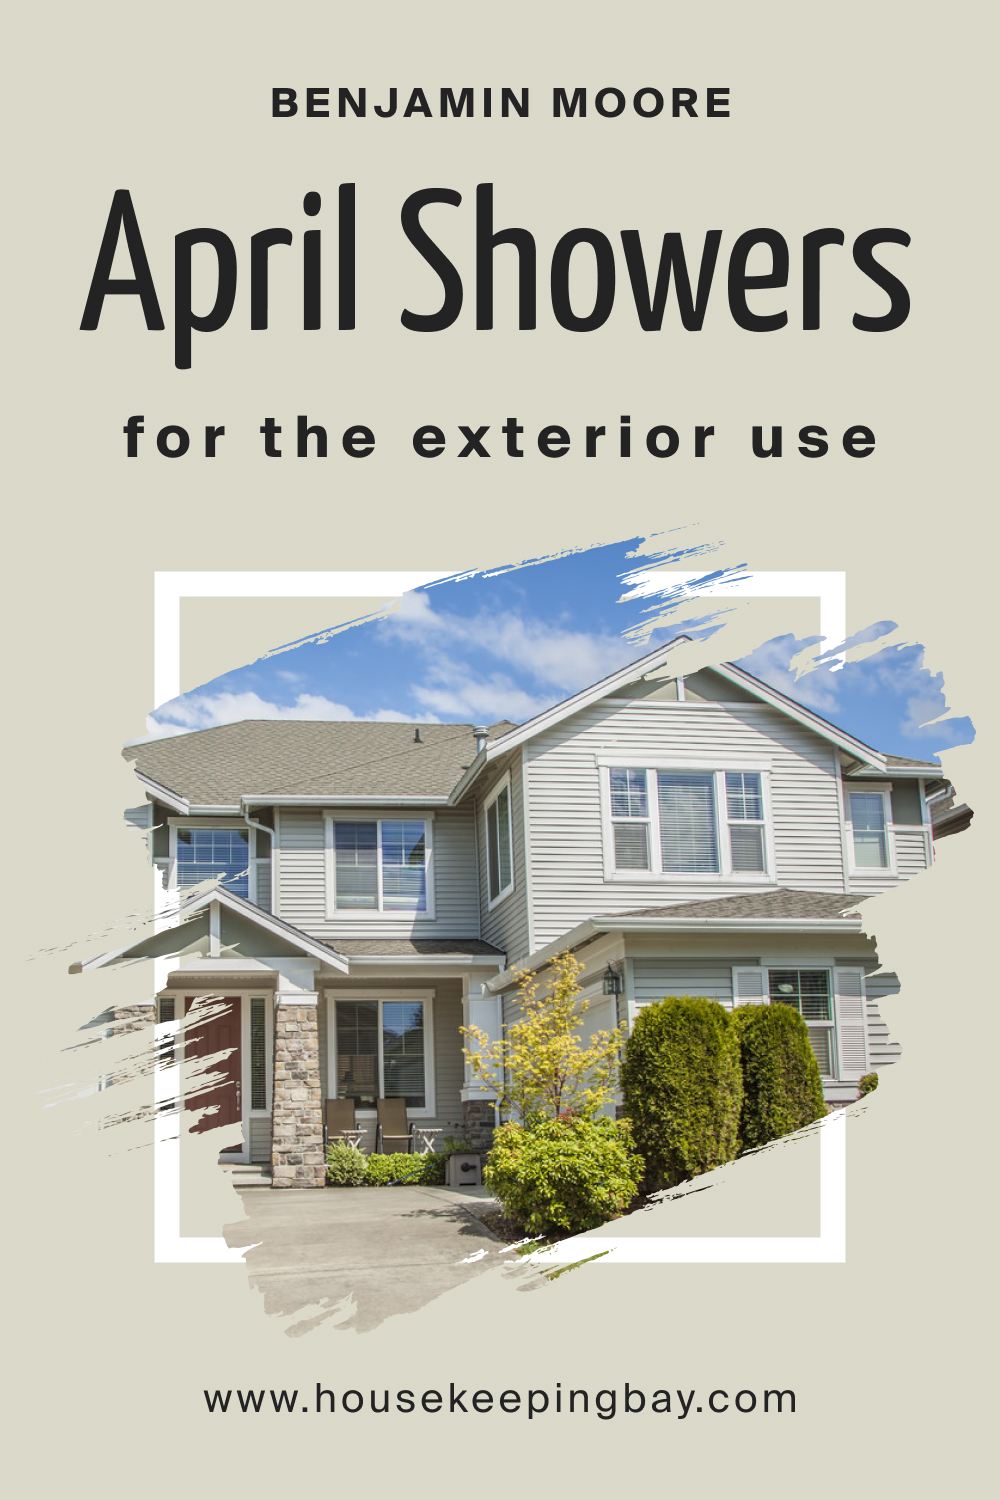 How to Use BM April Showers 1507 for an Exterior?